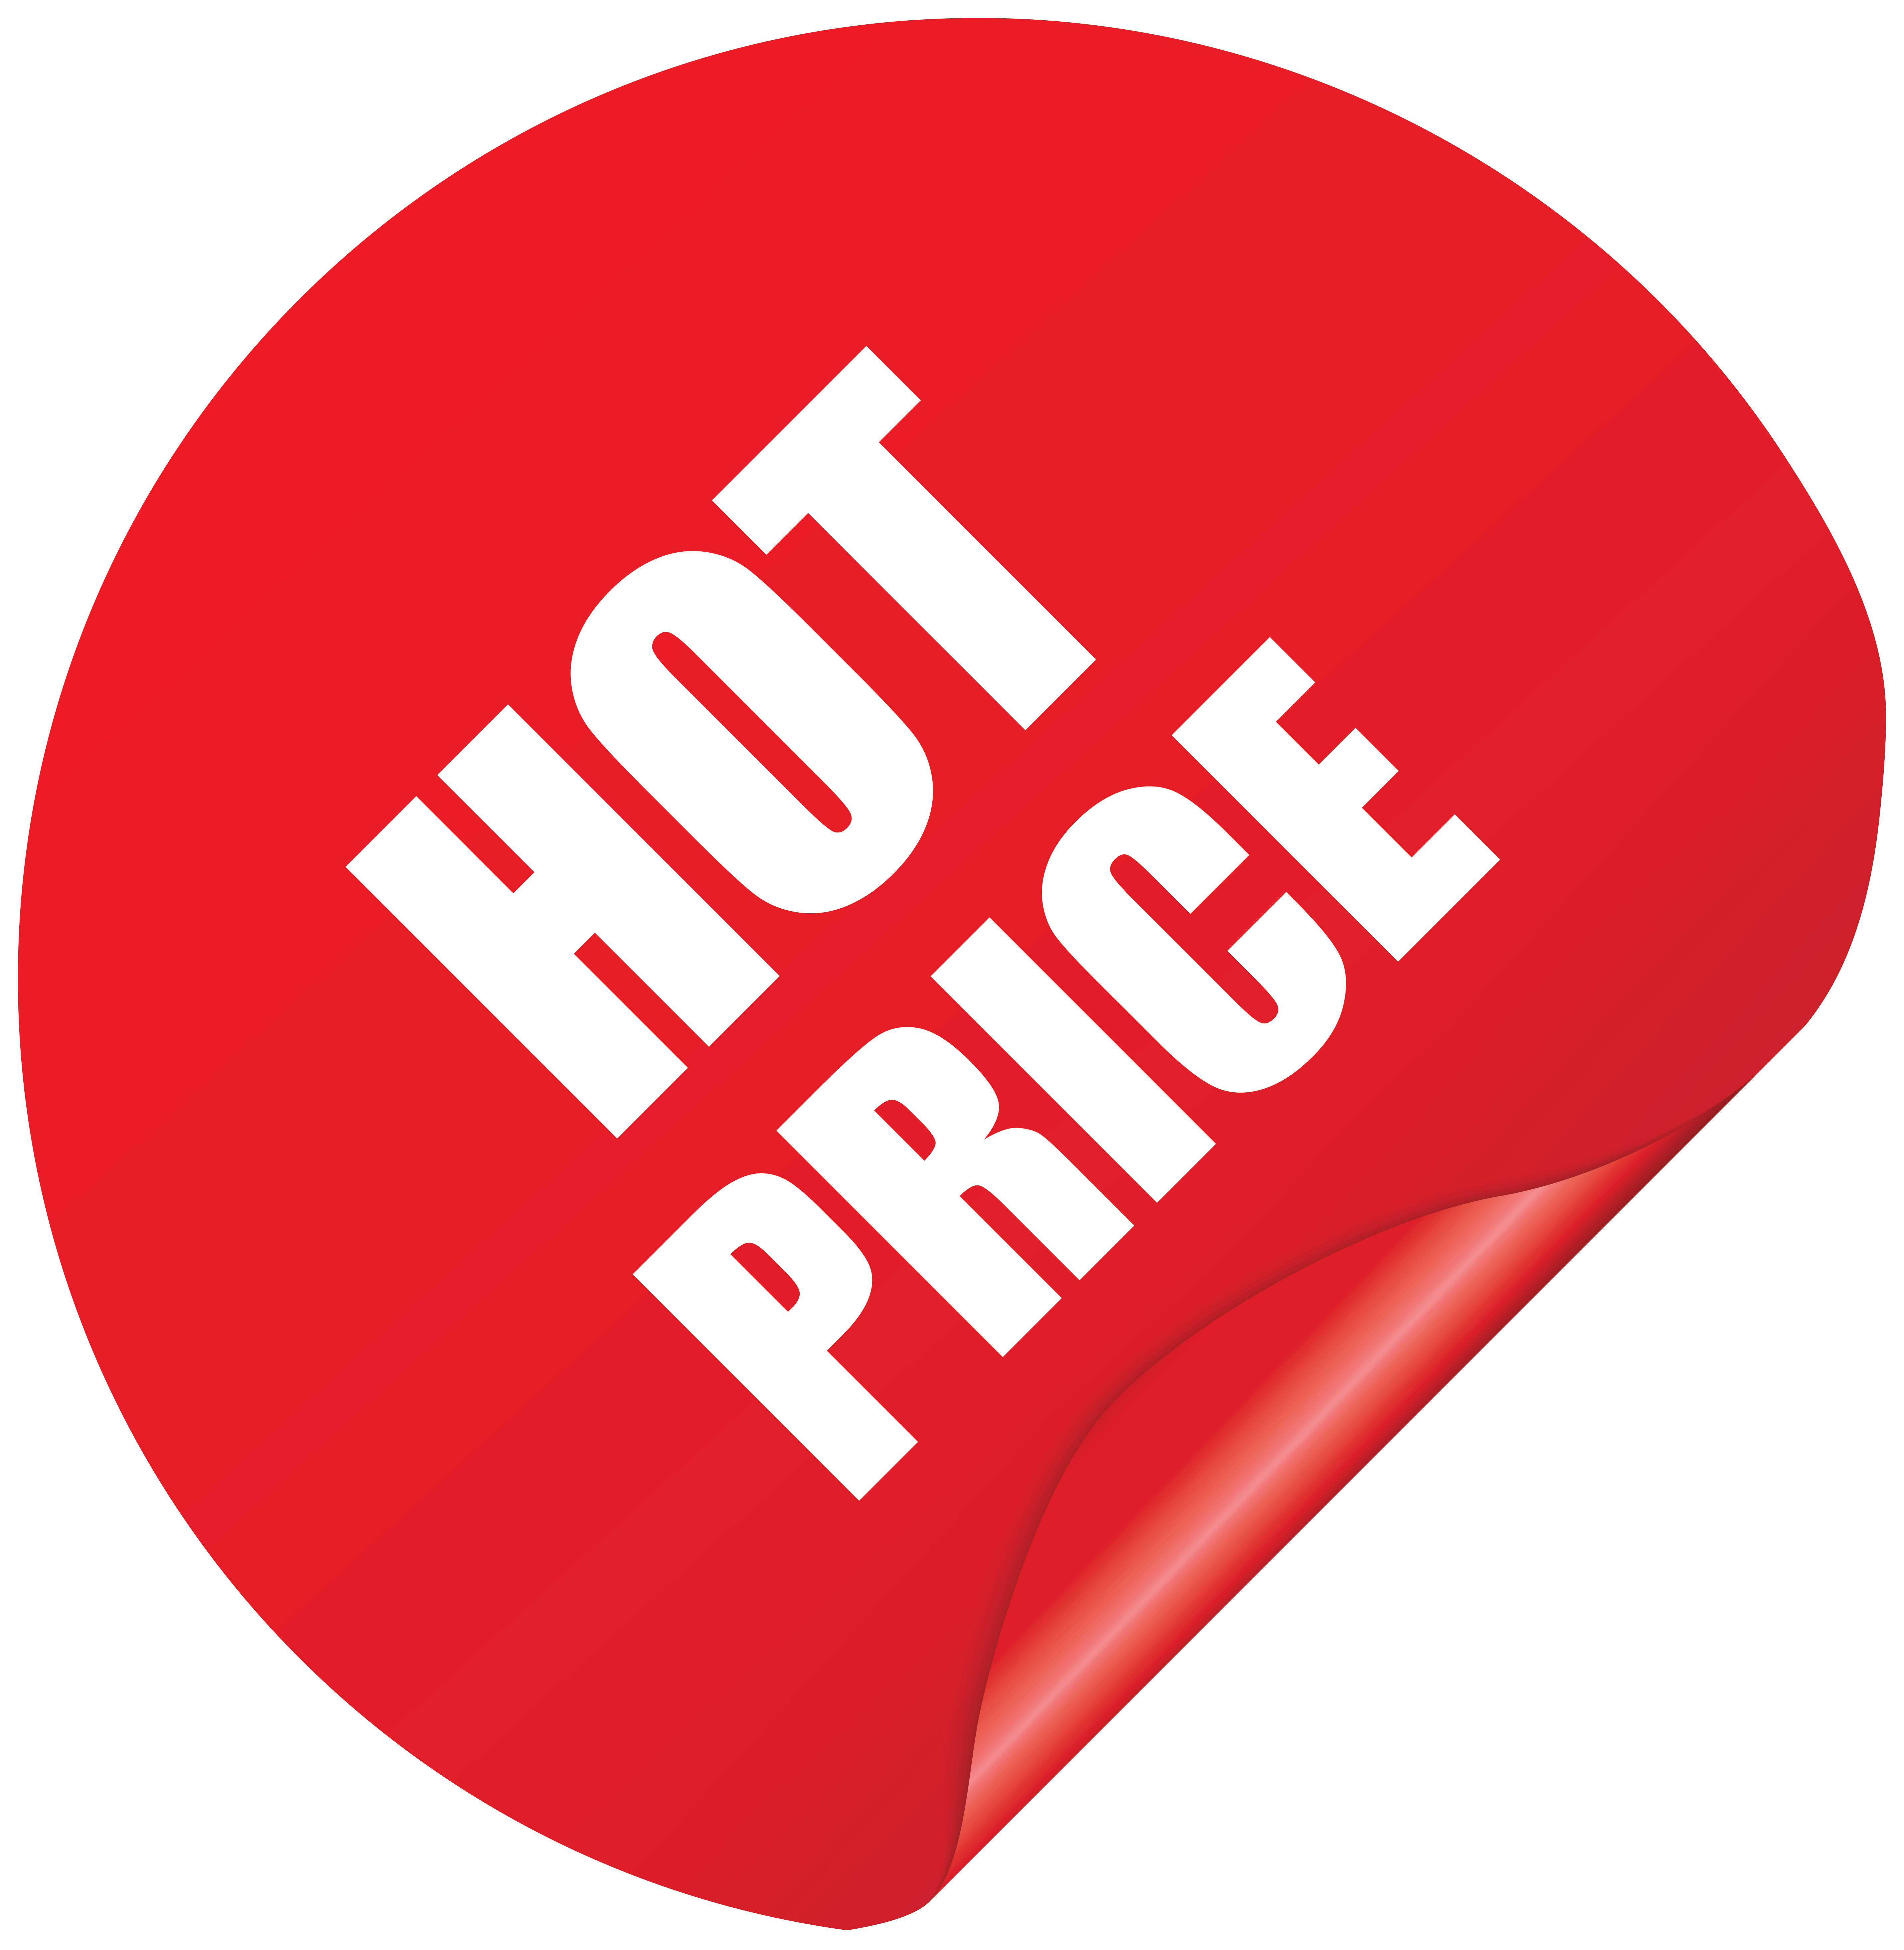 Hot Price Sticker PNG Clipart Picture